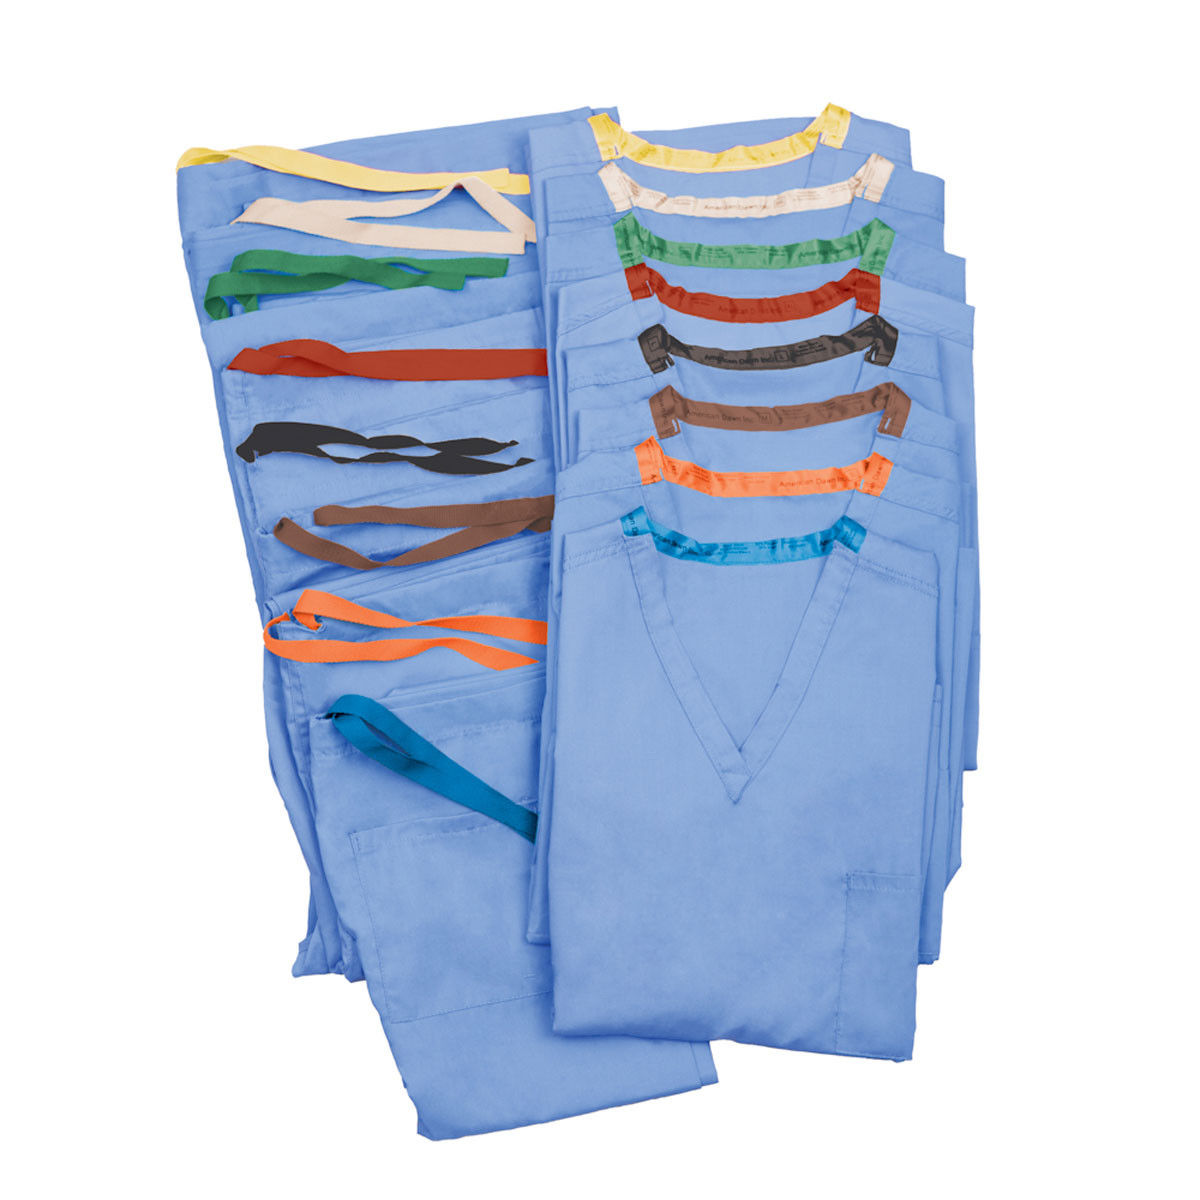 What's the right way to measure for Ceil Scrubs unisex scrub tops?